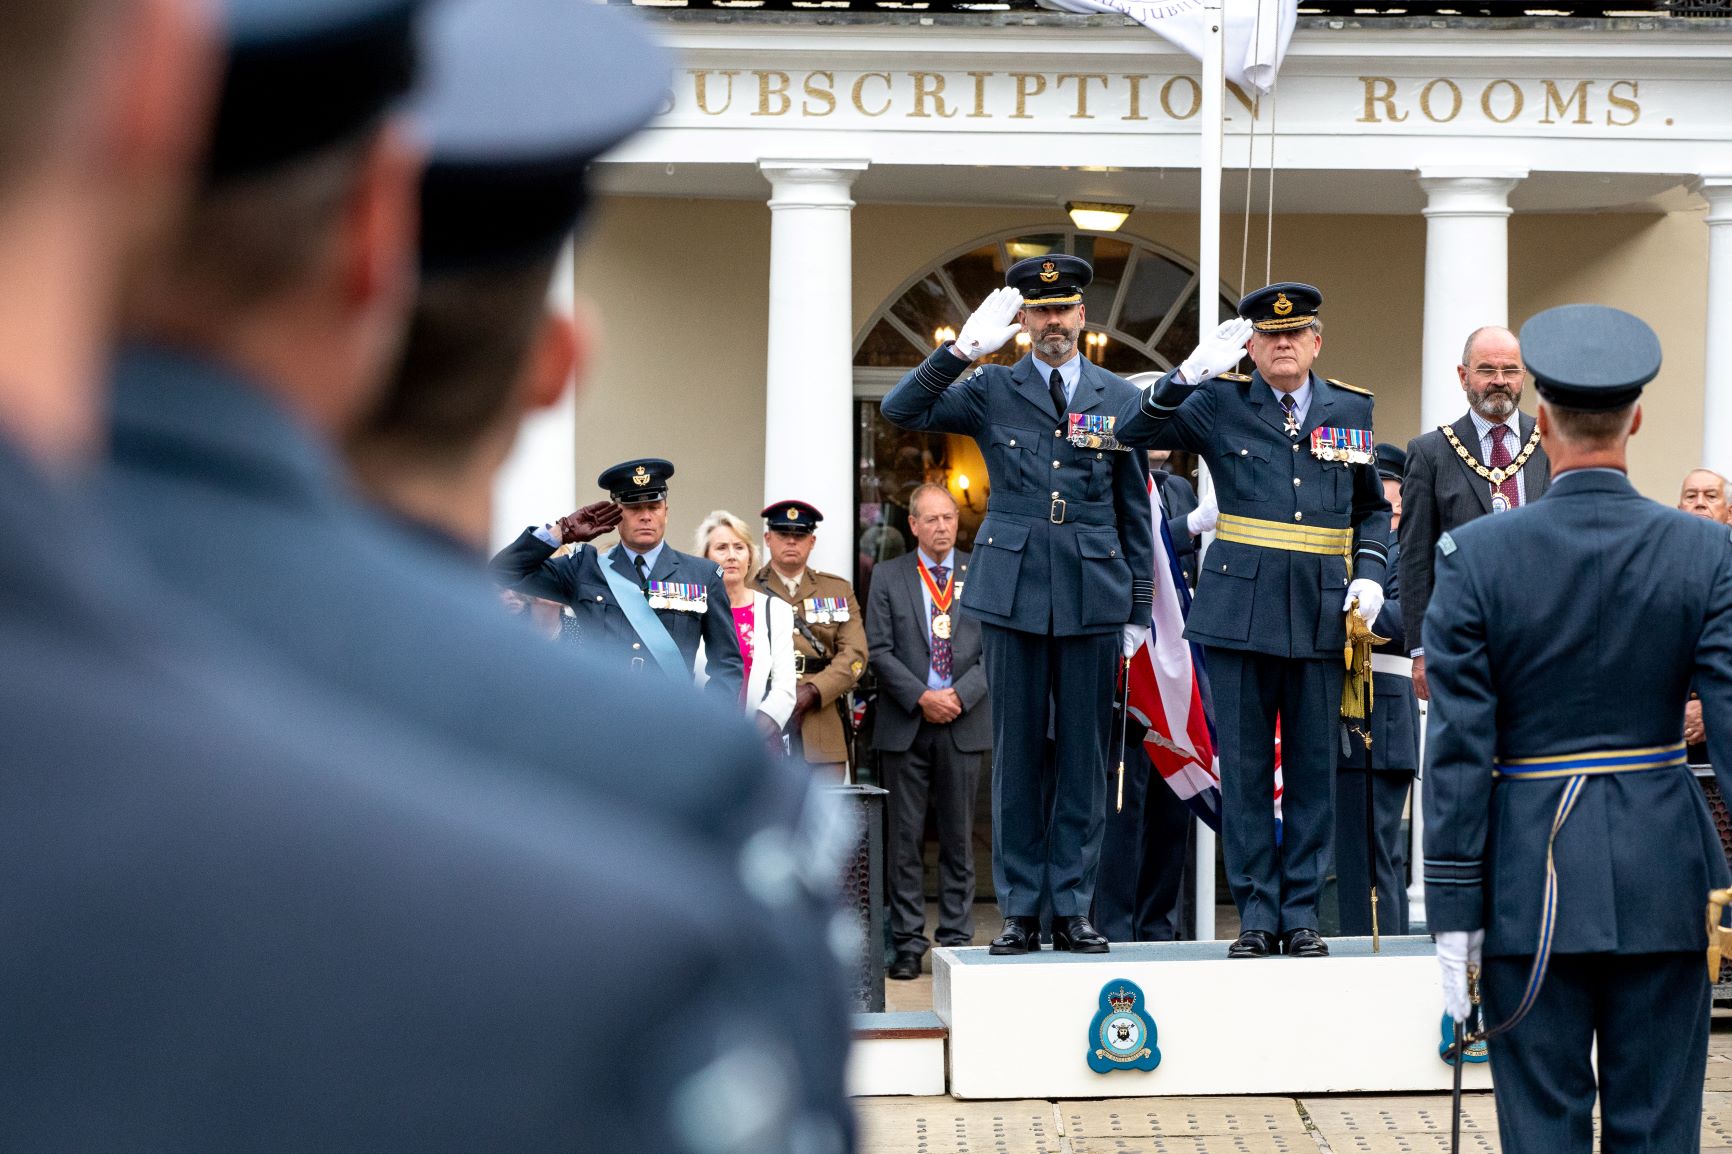 RAF Aviators salute during parade upon tiered stage.